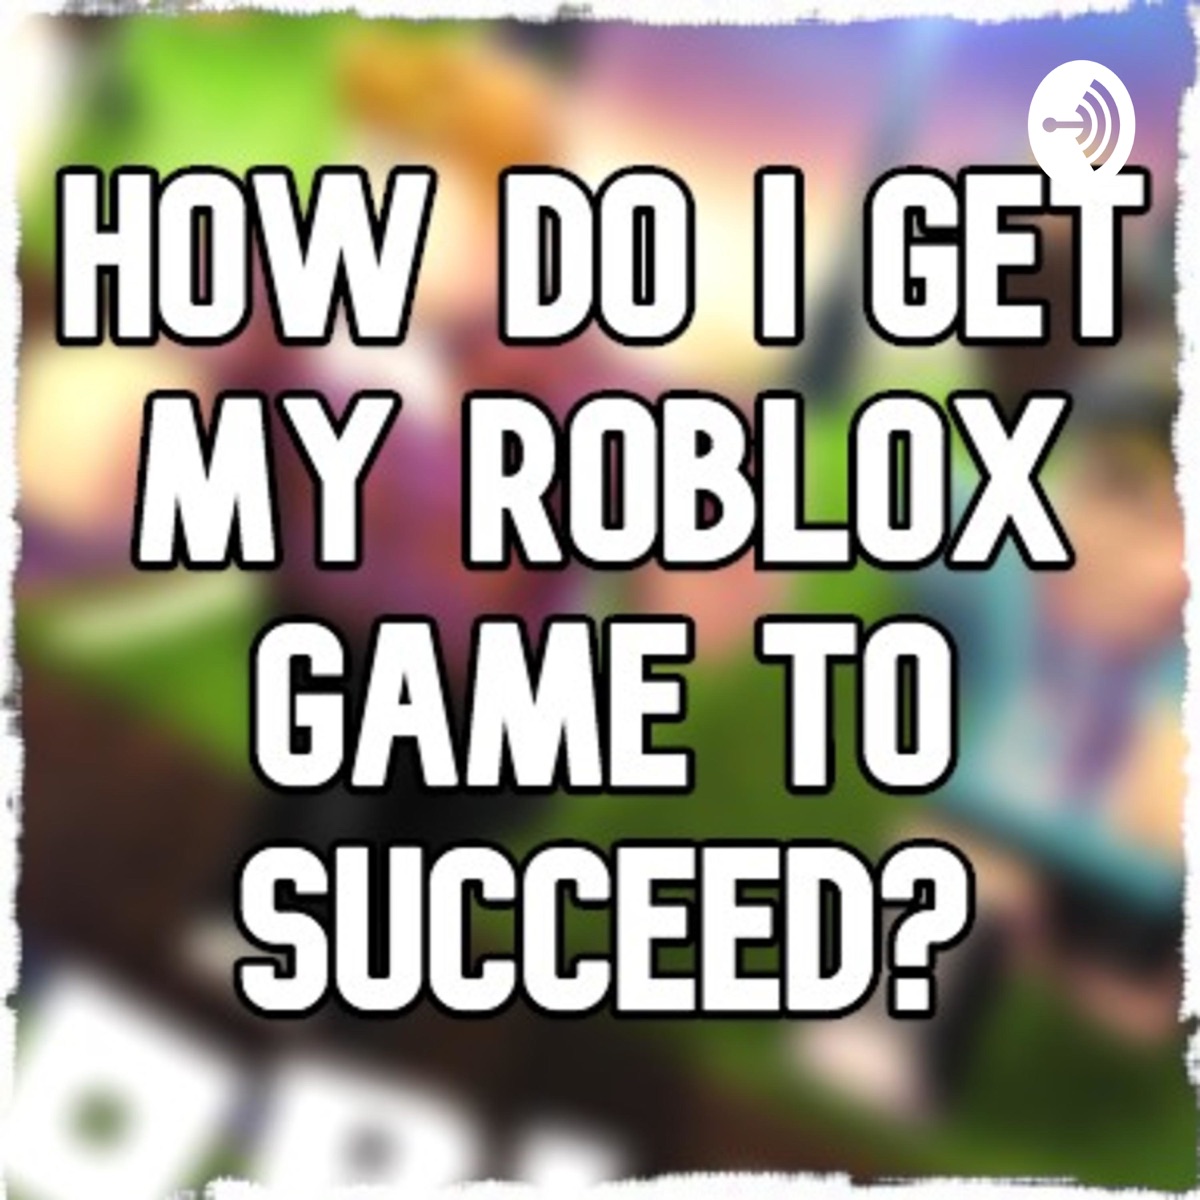 Related How Do I Make My Roblox Game Succeed Podcast Podtail - roblox music radio chatter